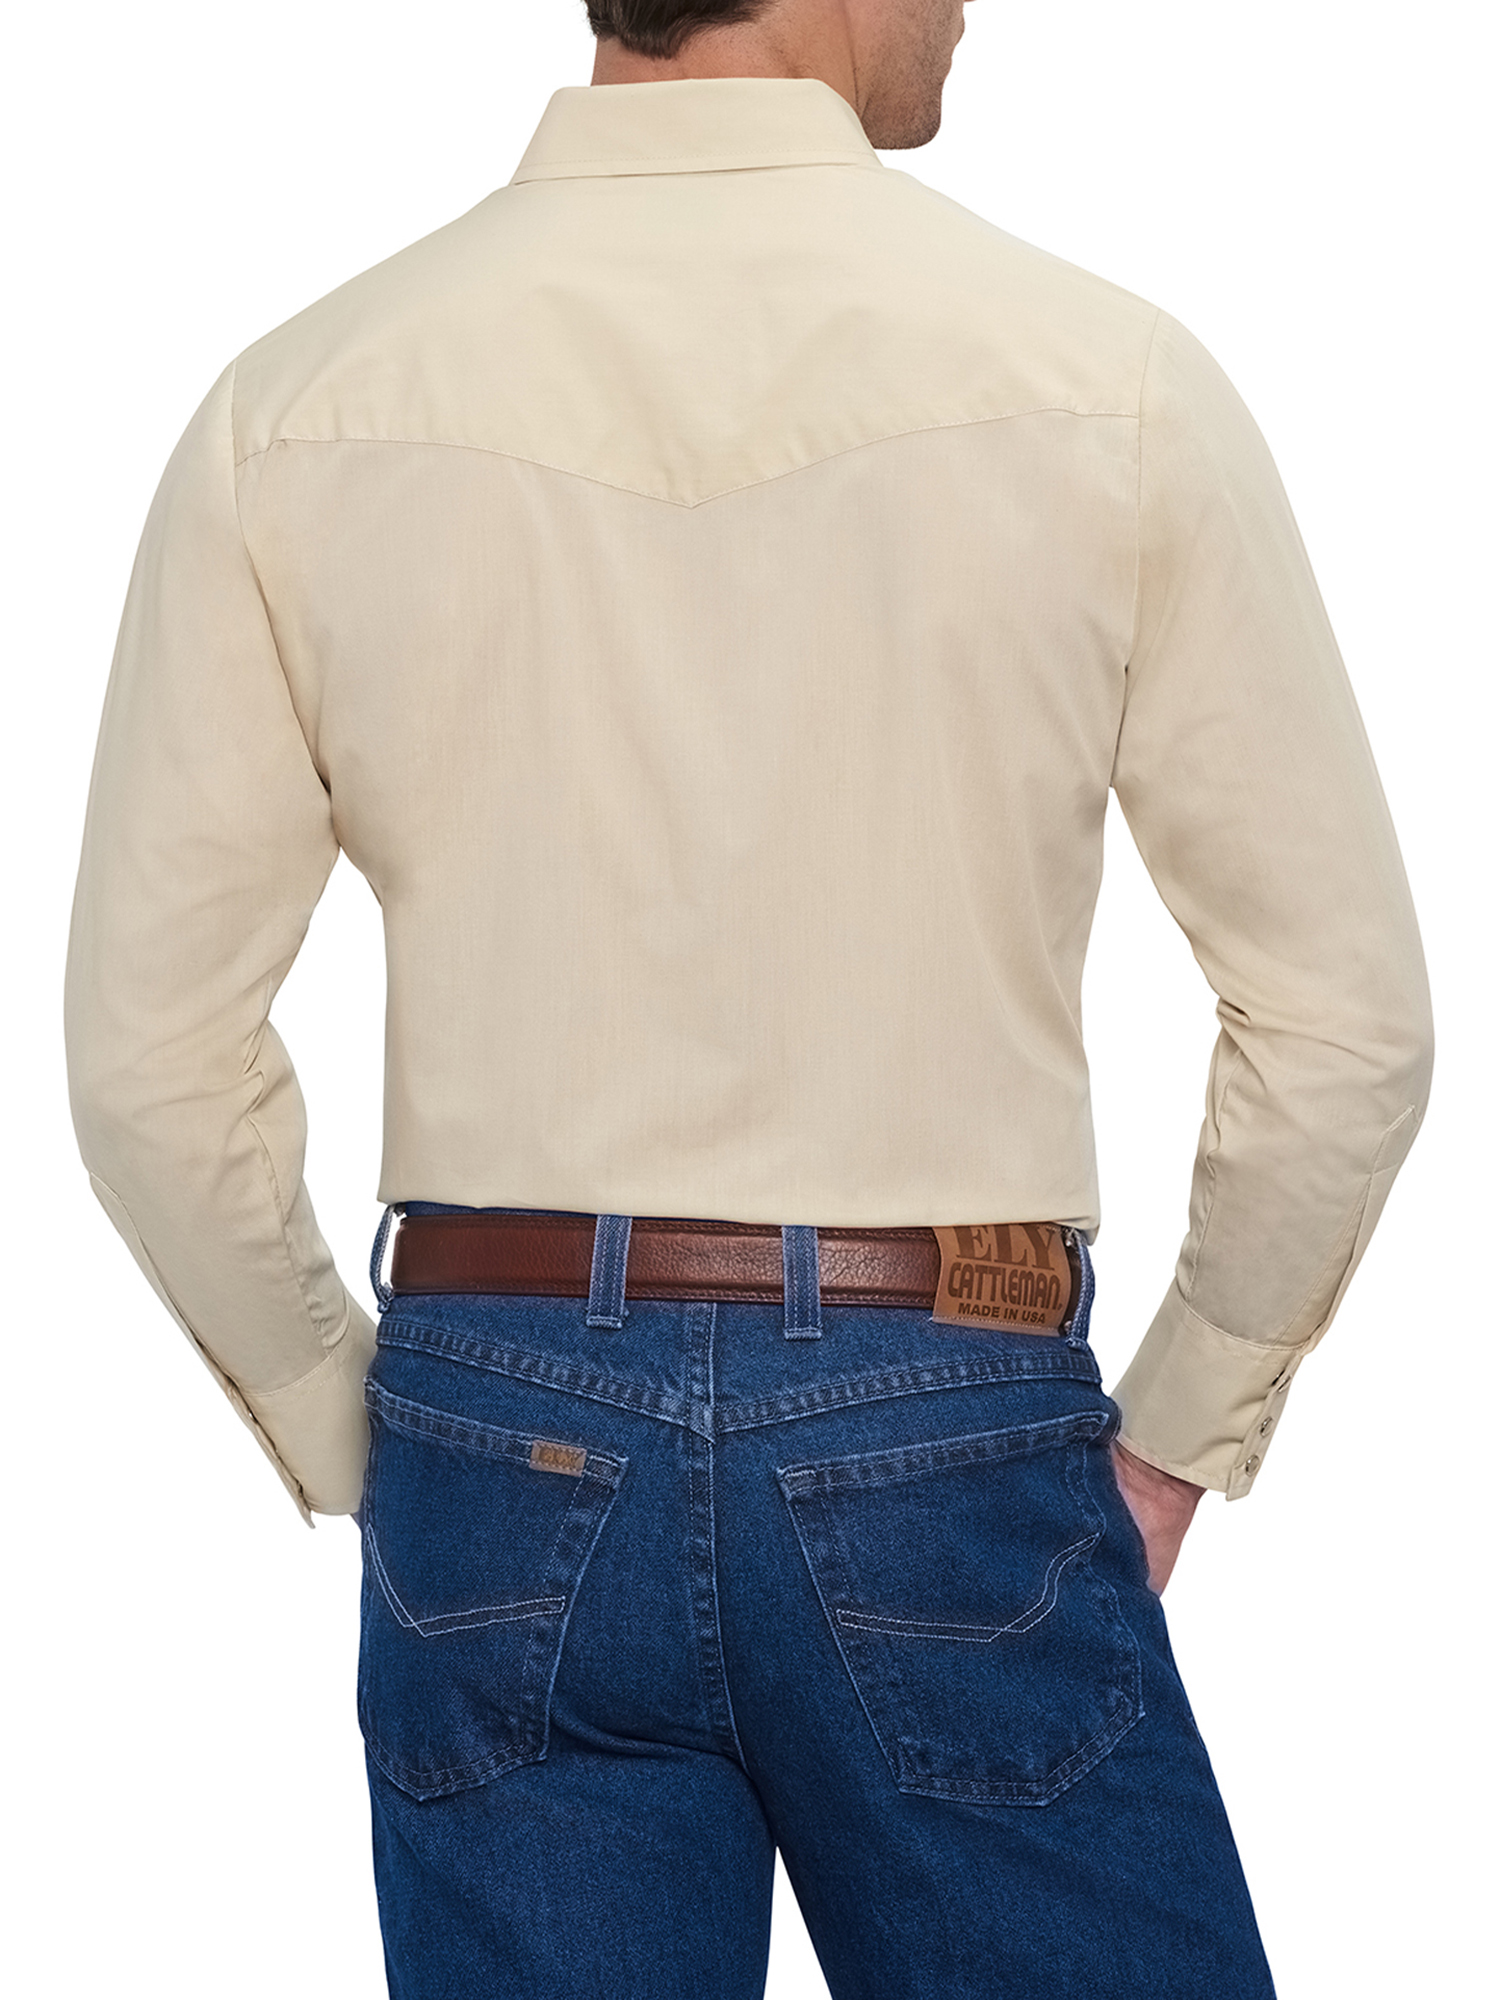 Ely Cattleman Men's Long Sleeve Solid Western Shirt - image 2 of 2